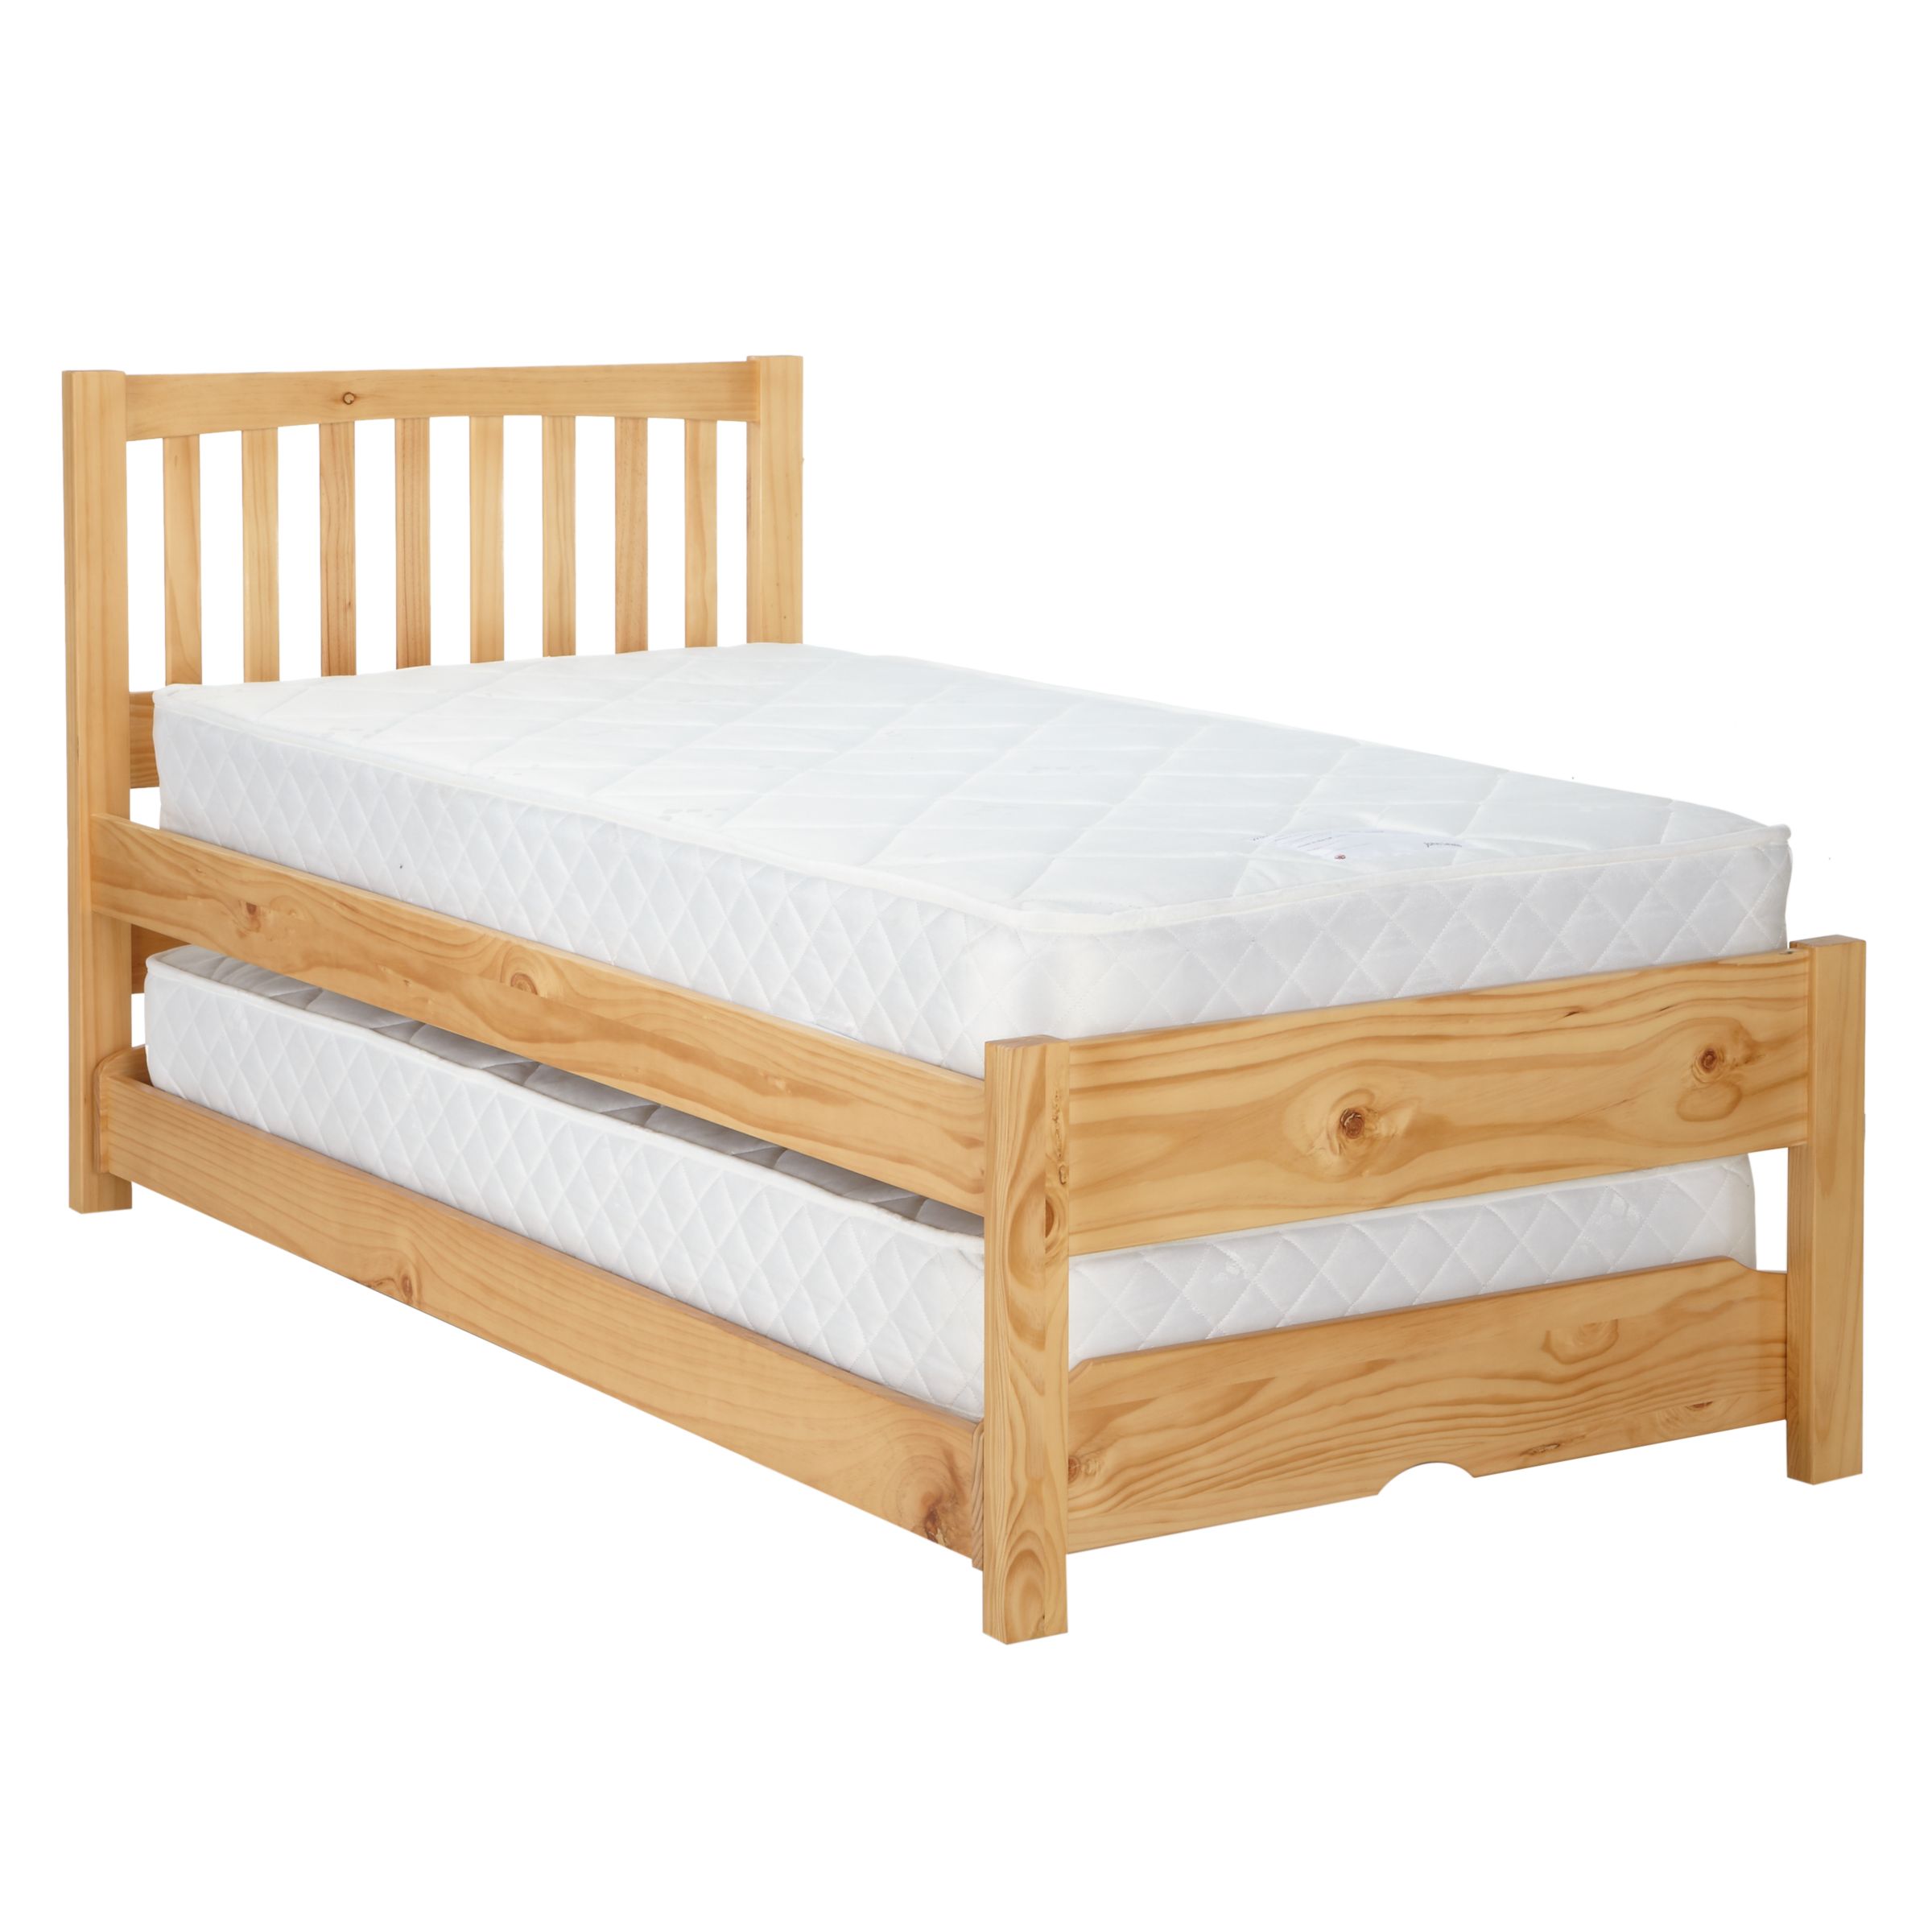 John Lewis The Basics Woodstock Trundle Guest Bed